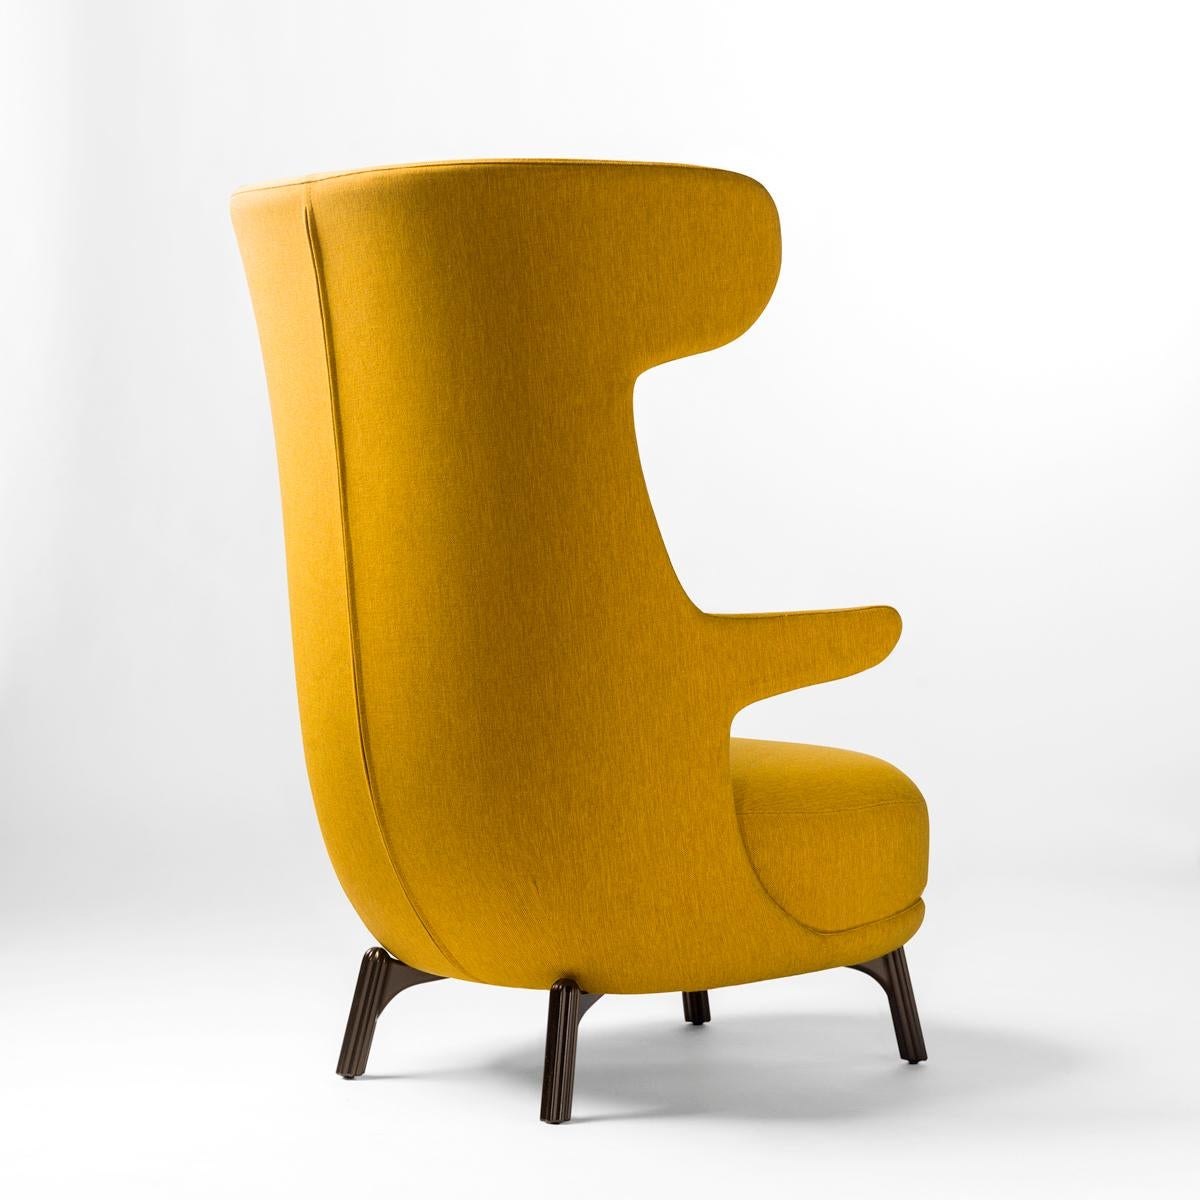 Modern Jaime Hayon, Contemporary, Monocolor in Yellow Fabric Upholstery Dino Armchair